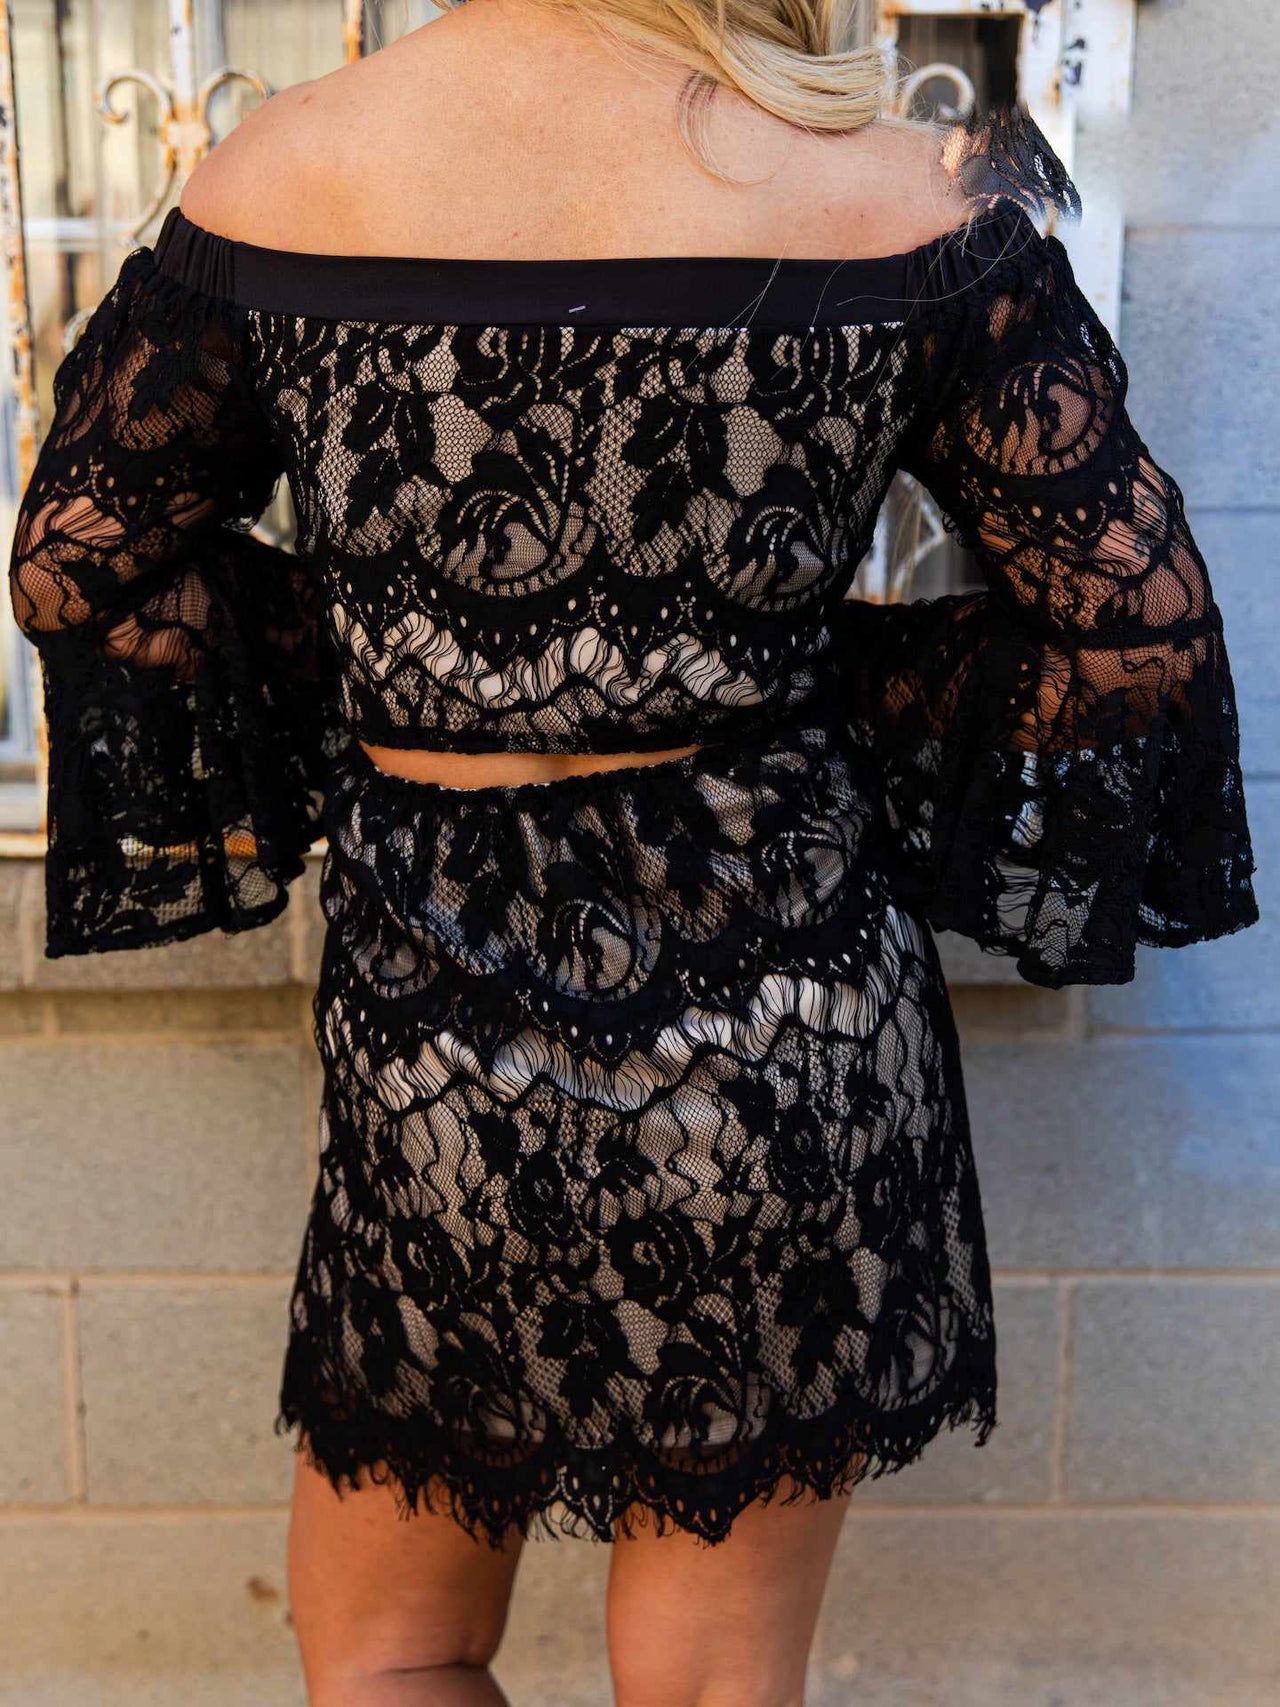 Locked in Lace Off Shoulder Dress - Black with Neutral Lining-Dresses-Southern Fried Chics